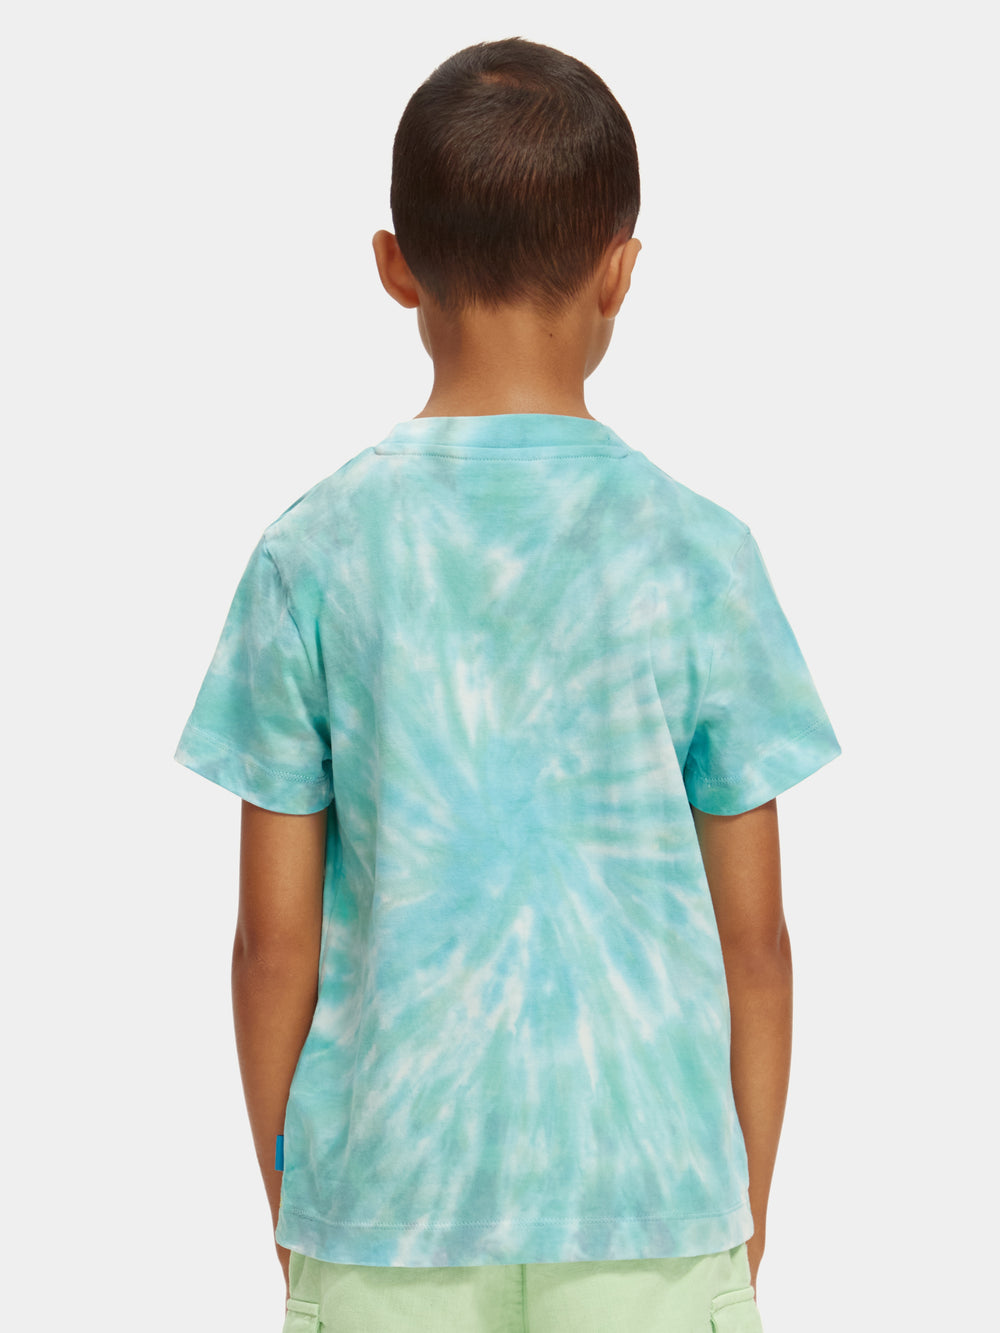 Relaxed fit graphic tie-dye t-shirt - Scotch & Soda AU